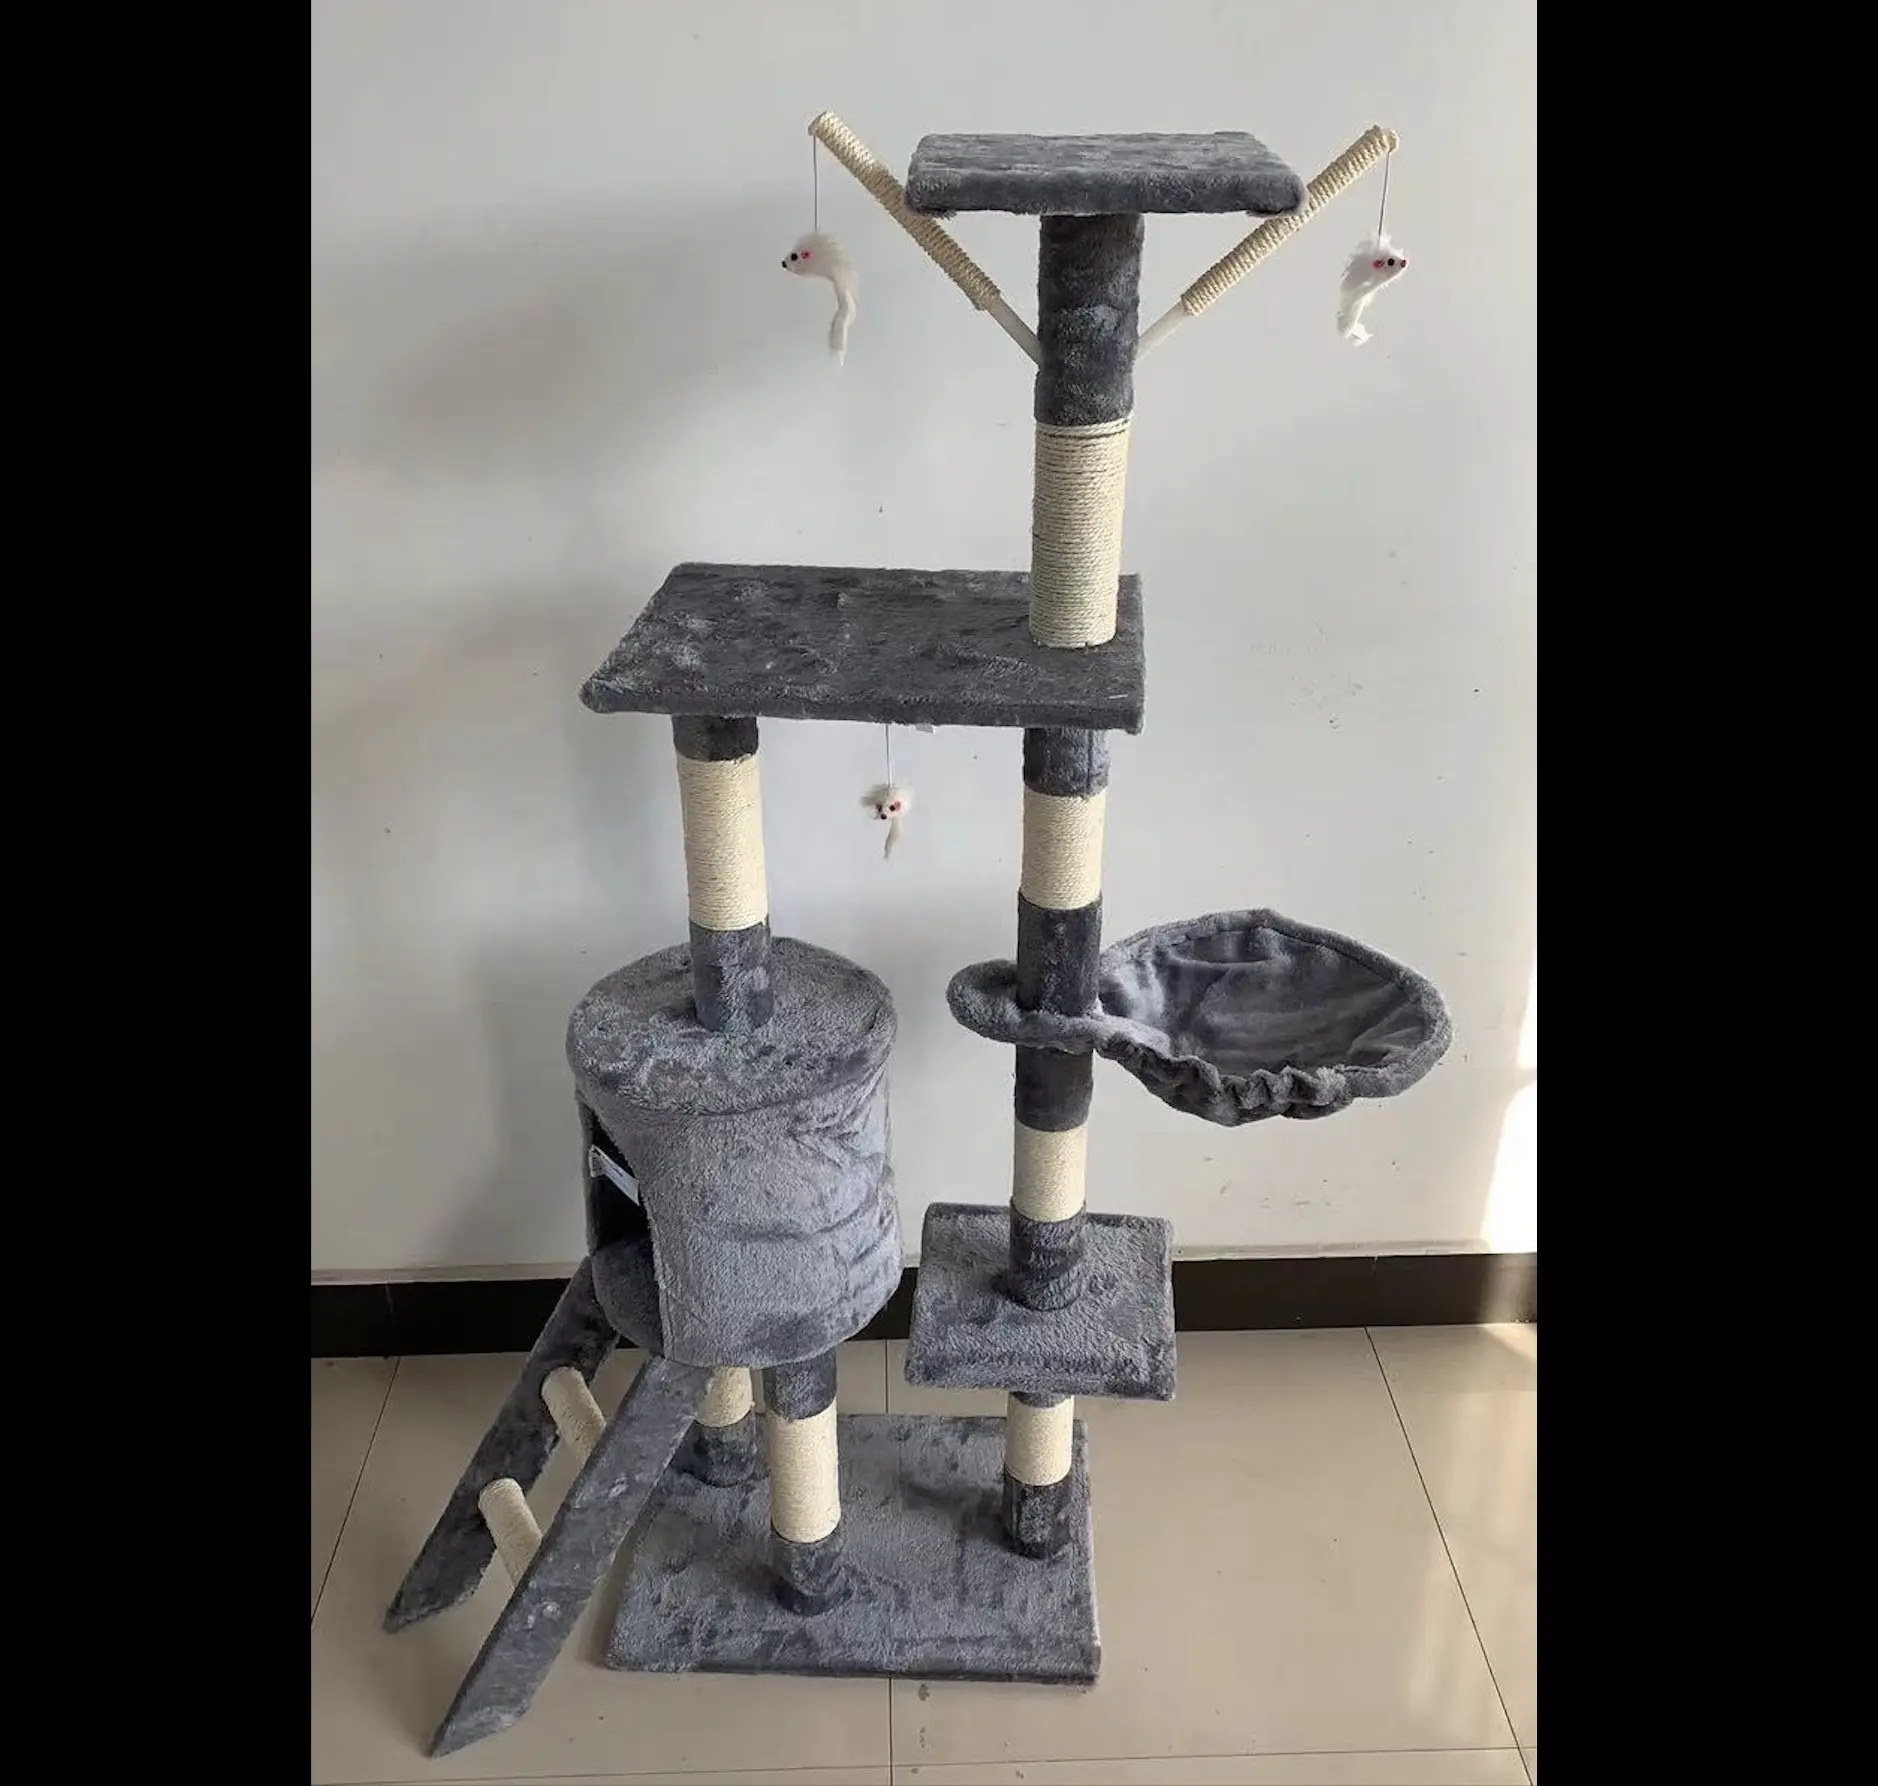 Customized Design Plush Wooden Pet Condo Tower Supplier Cat Furniture Cat Toys Cat Scratcher Tree House Tower